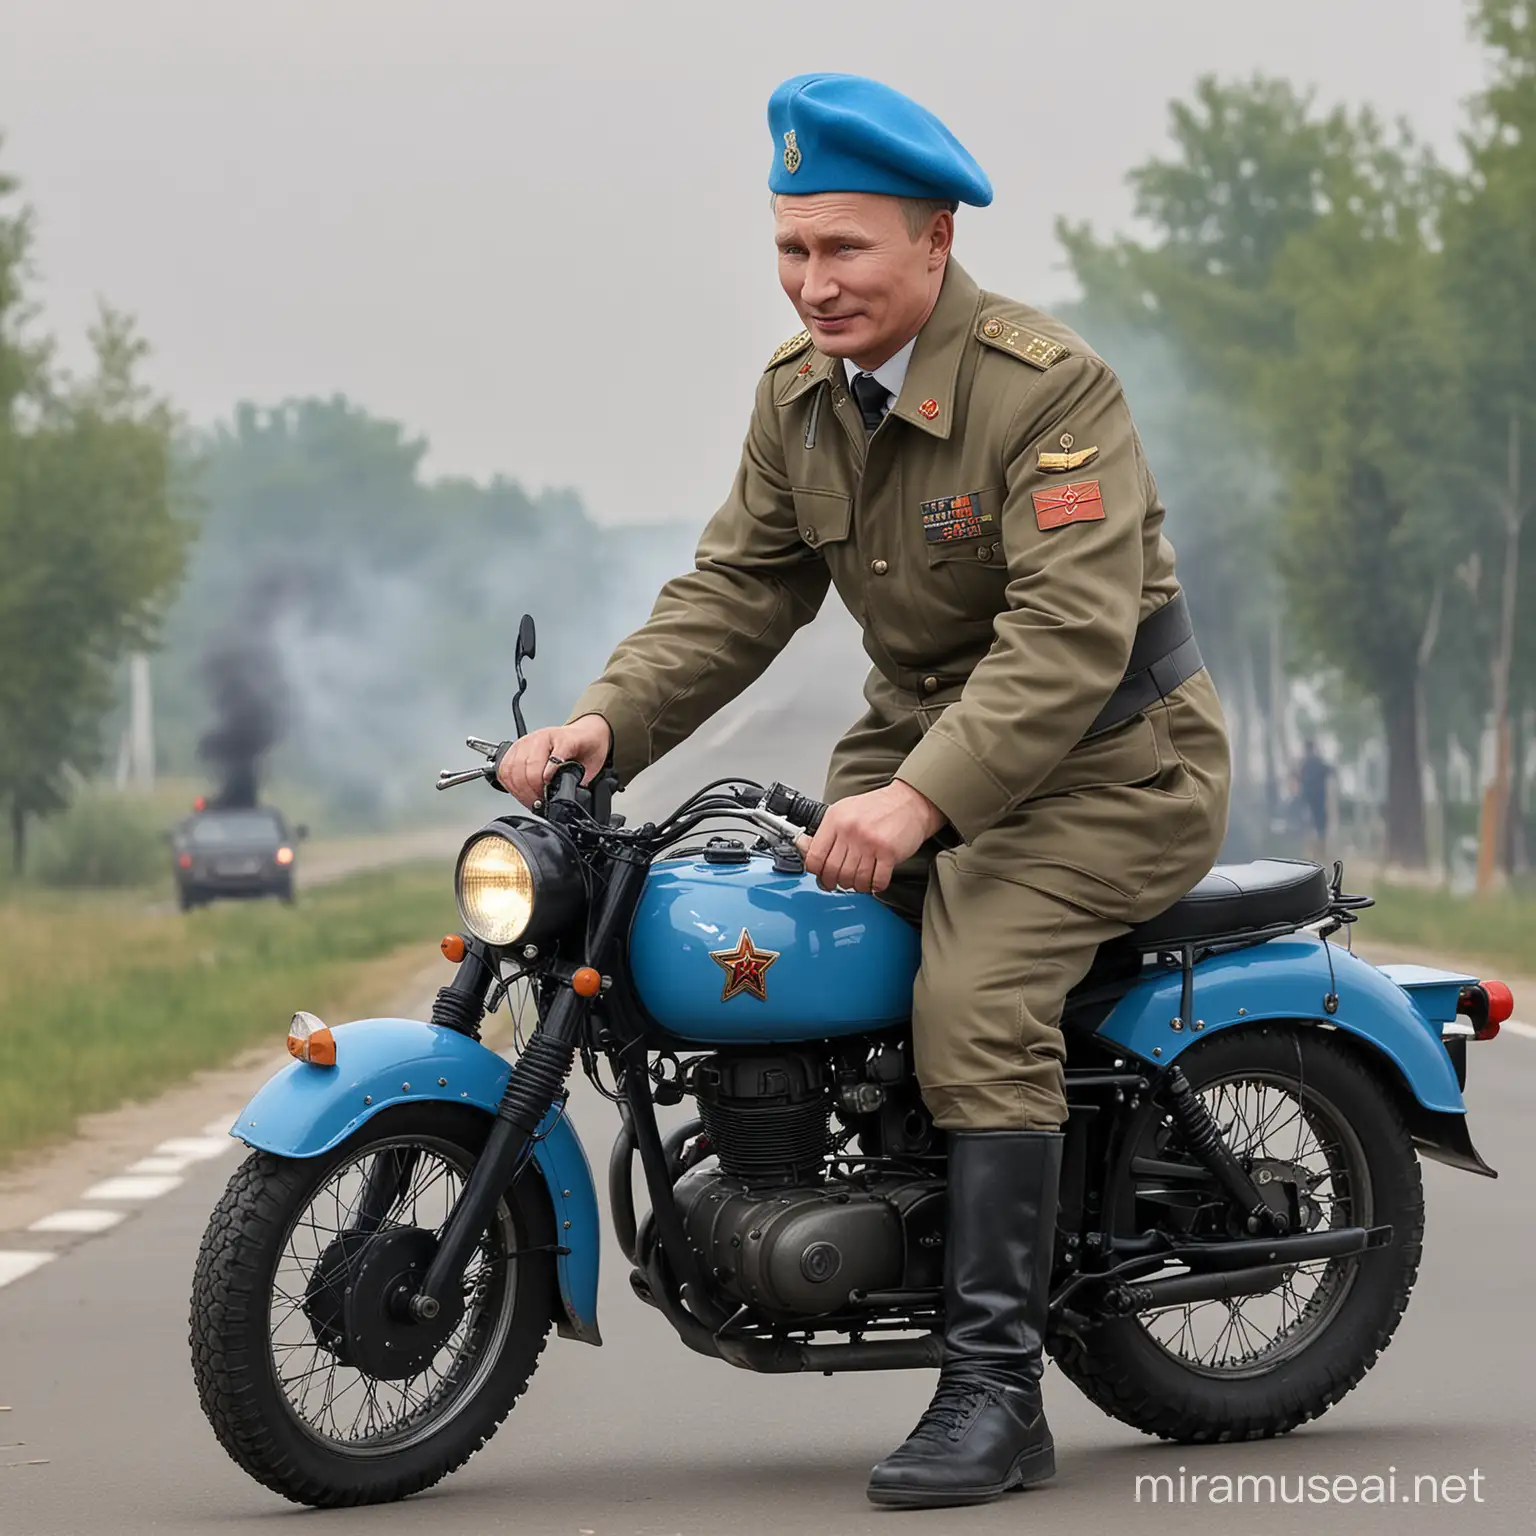 wholely side full look 10 meters away, 65years old real face lifelike putin wear small blue beret hat,soviet military uniform , properly ,laughing driving a real size light blue 1 wheels motorcycle ，1 wheel fly to sky,vast black smoking pour from behide tube ,Normal  retio,